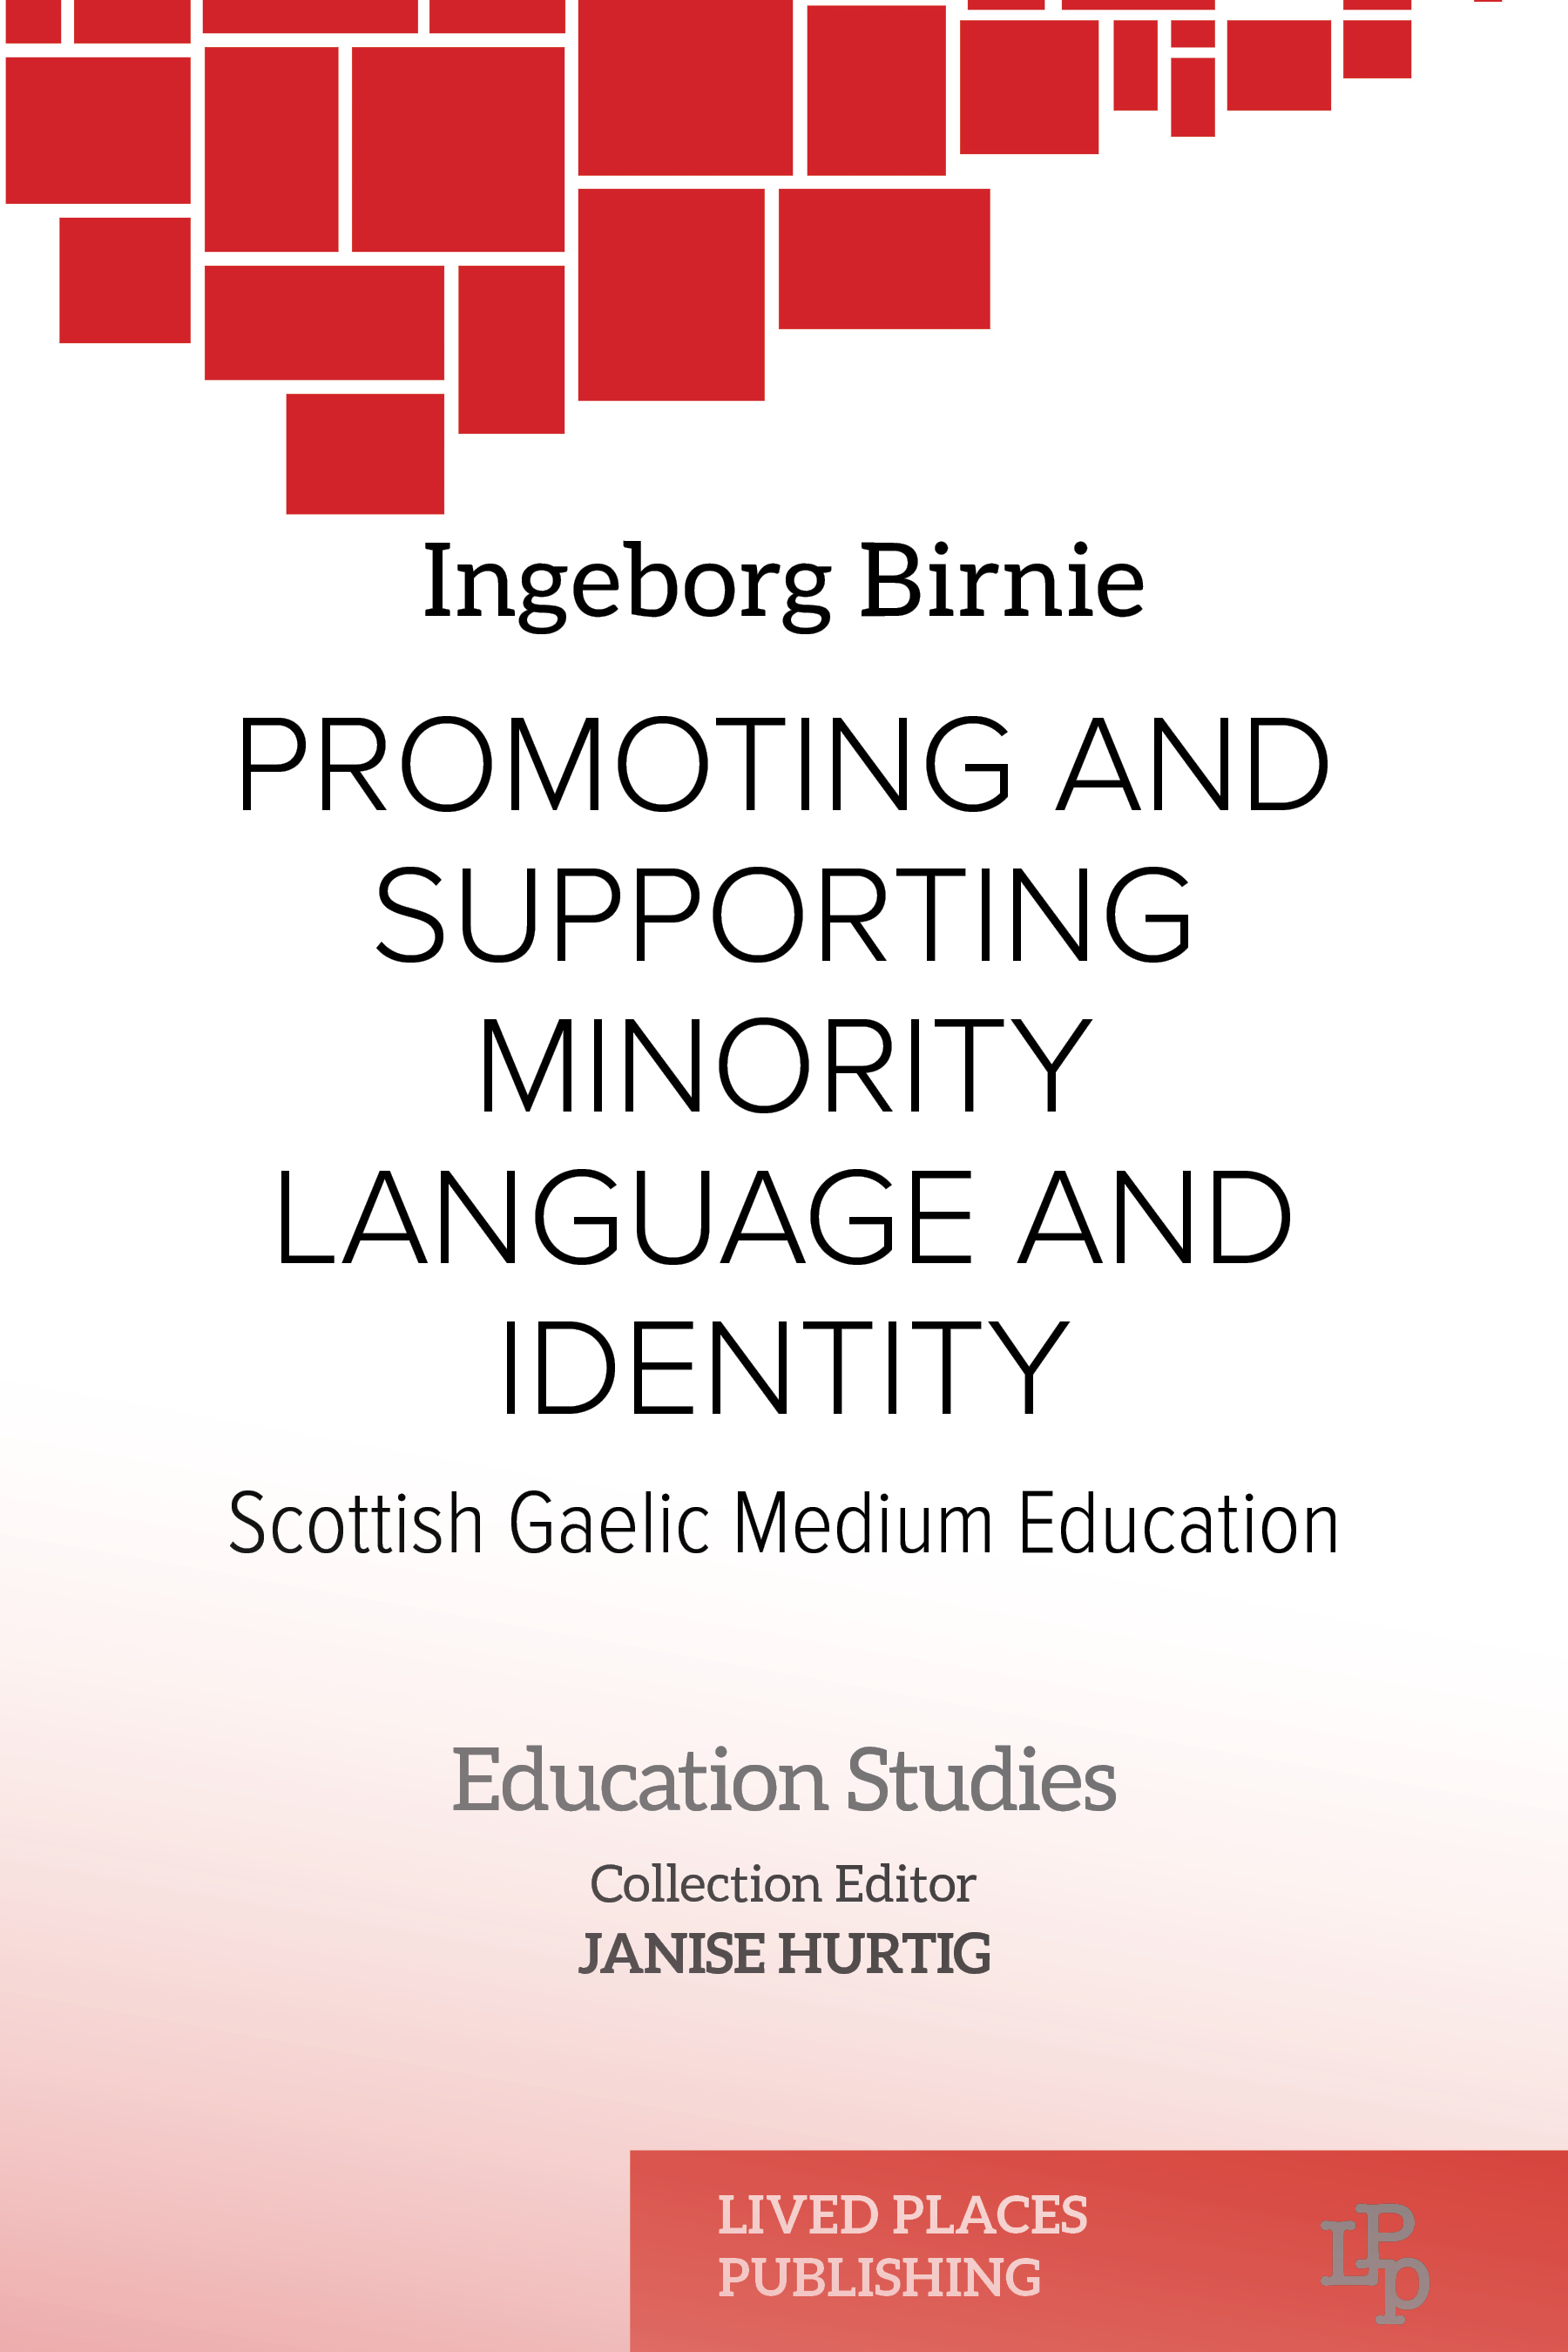 Promoting and Supporting Minority Language and Identity